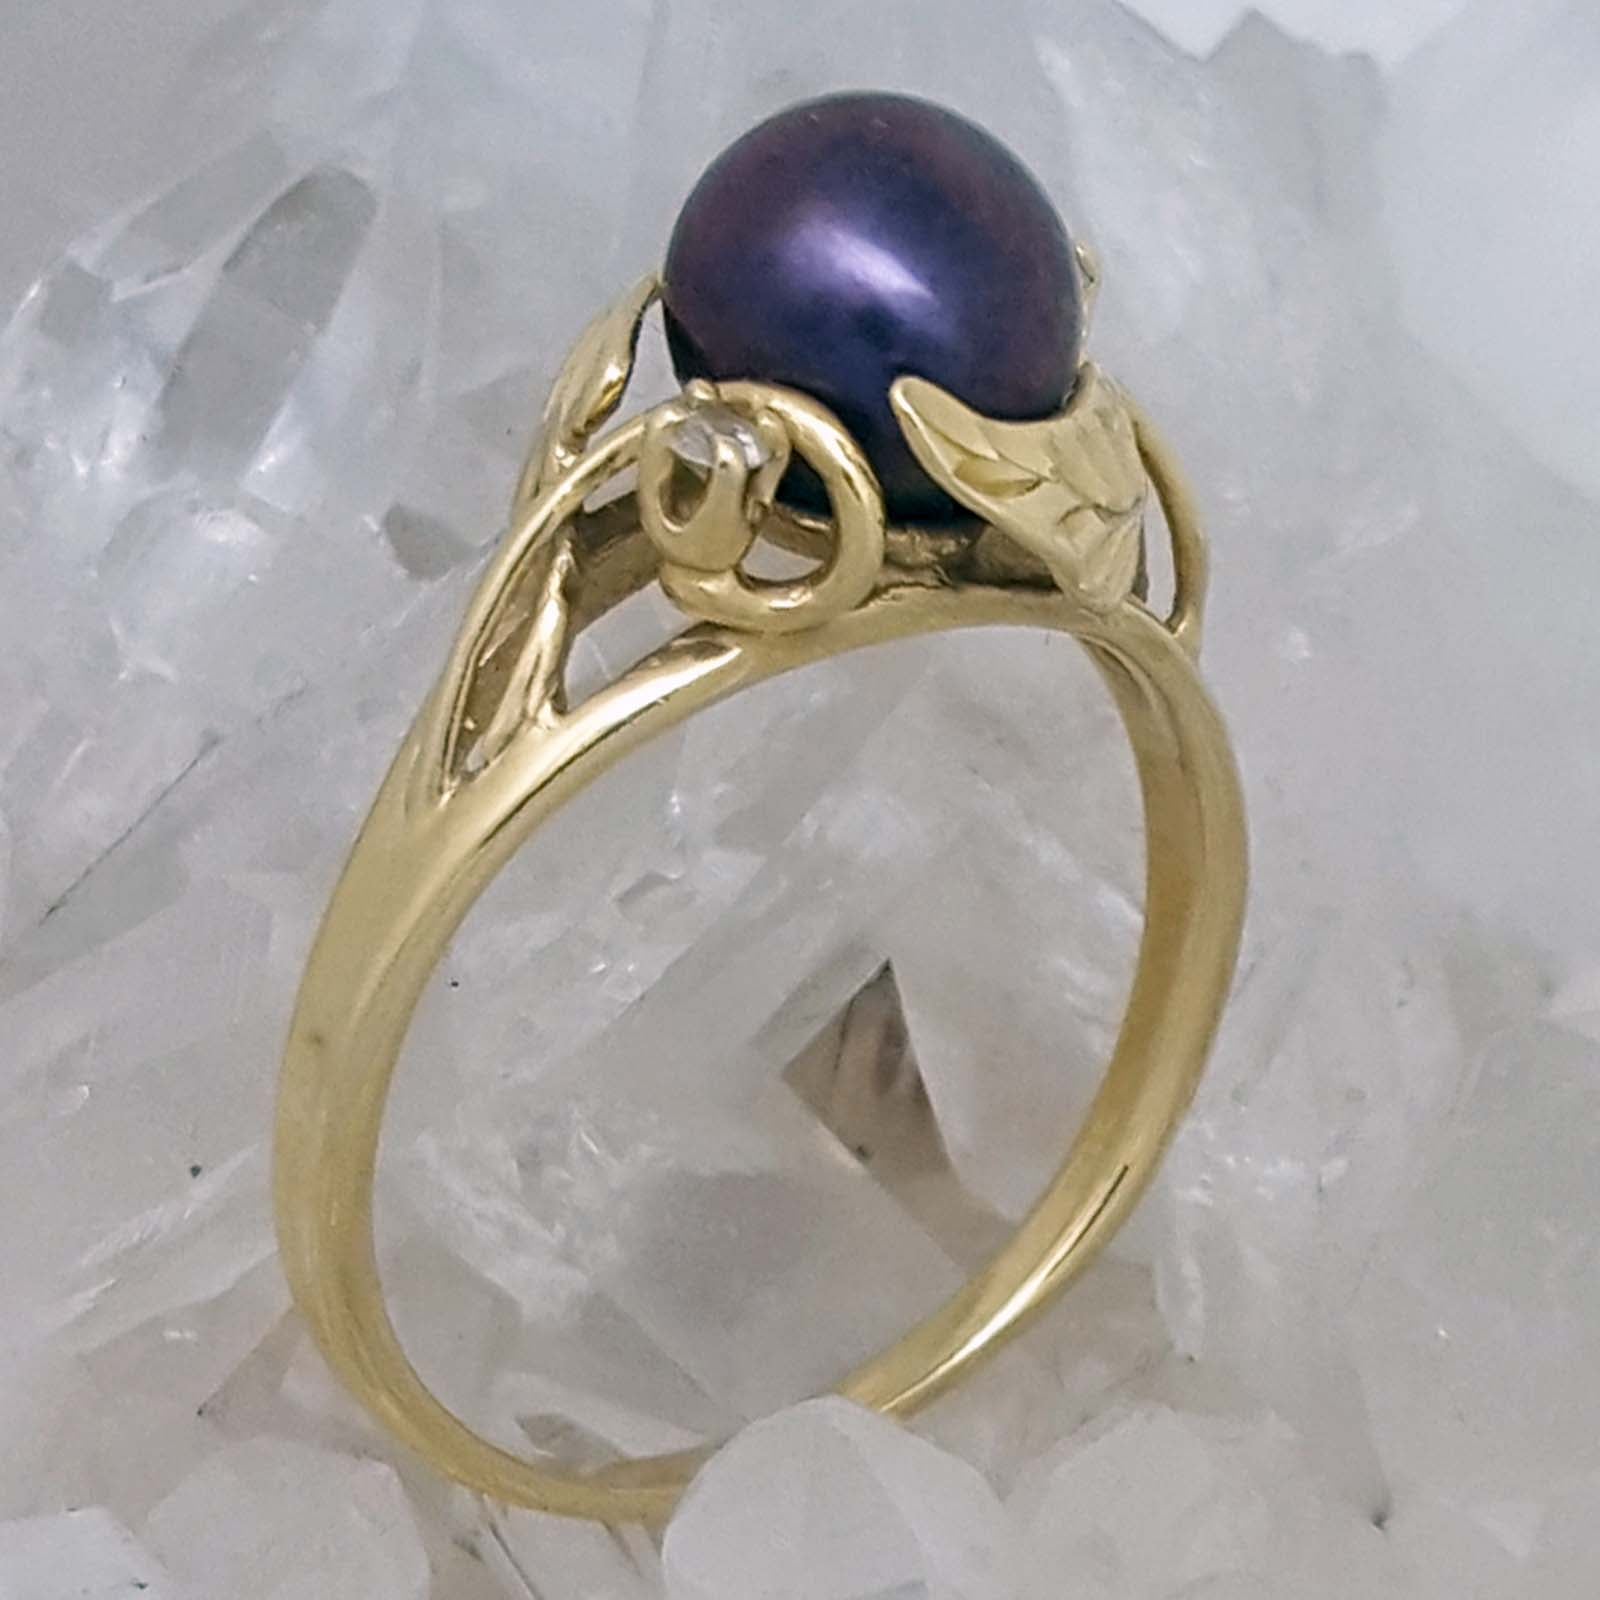 Modern Vintage 14K Yellow Gold 3.0 Carat Blue Sapphire Solitaire Ring  R102-14KYGBS | Caravaggio Jewelry